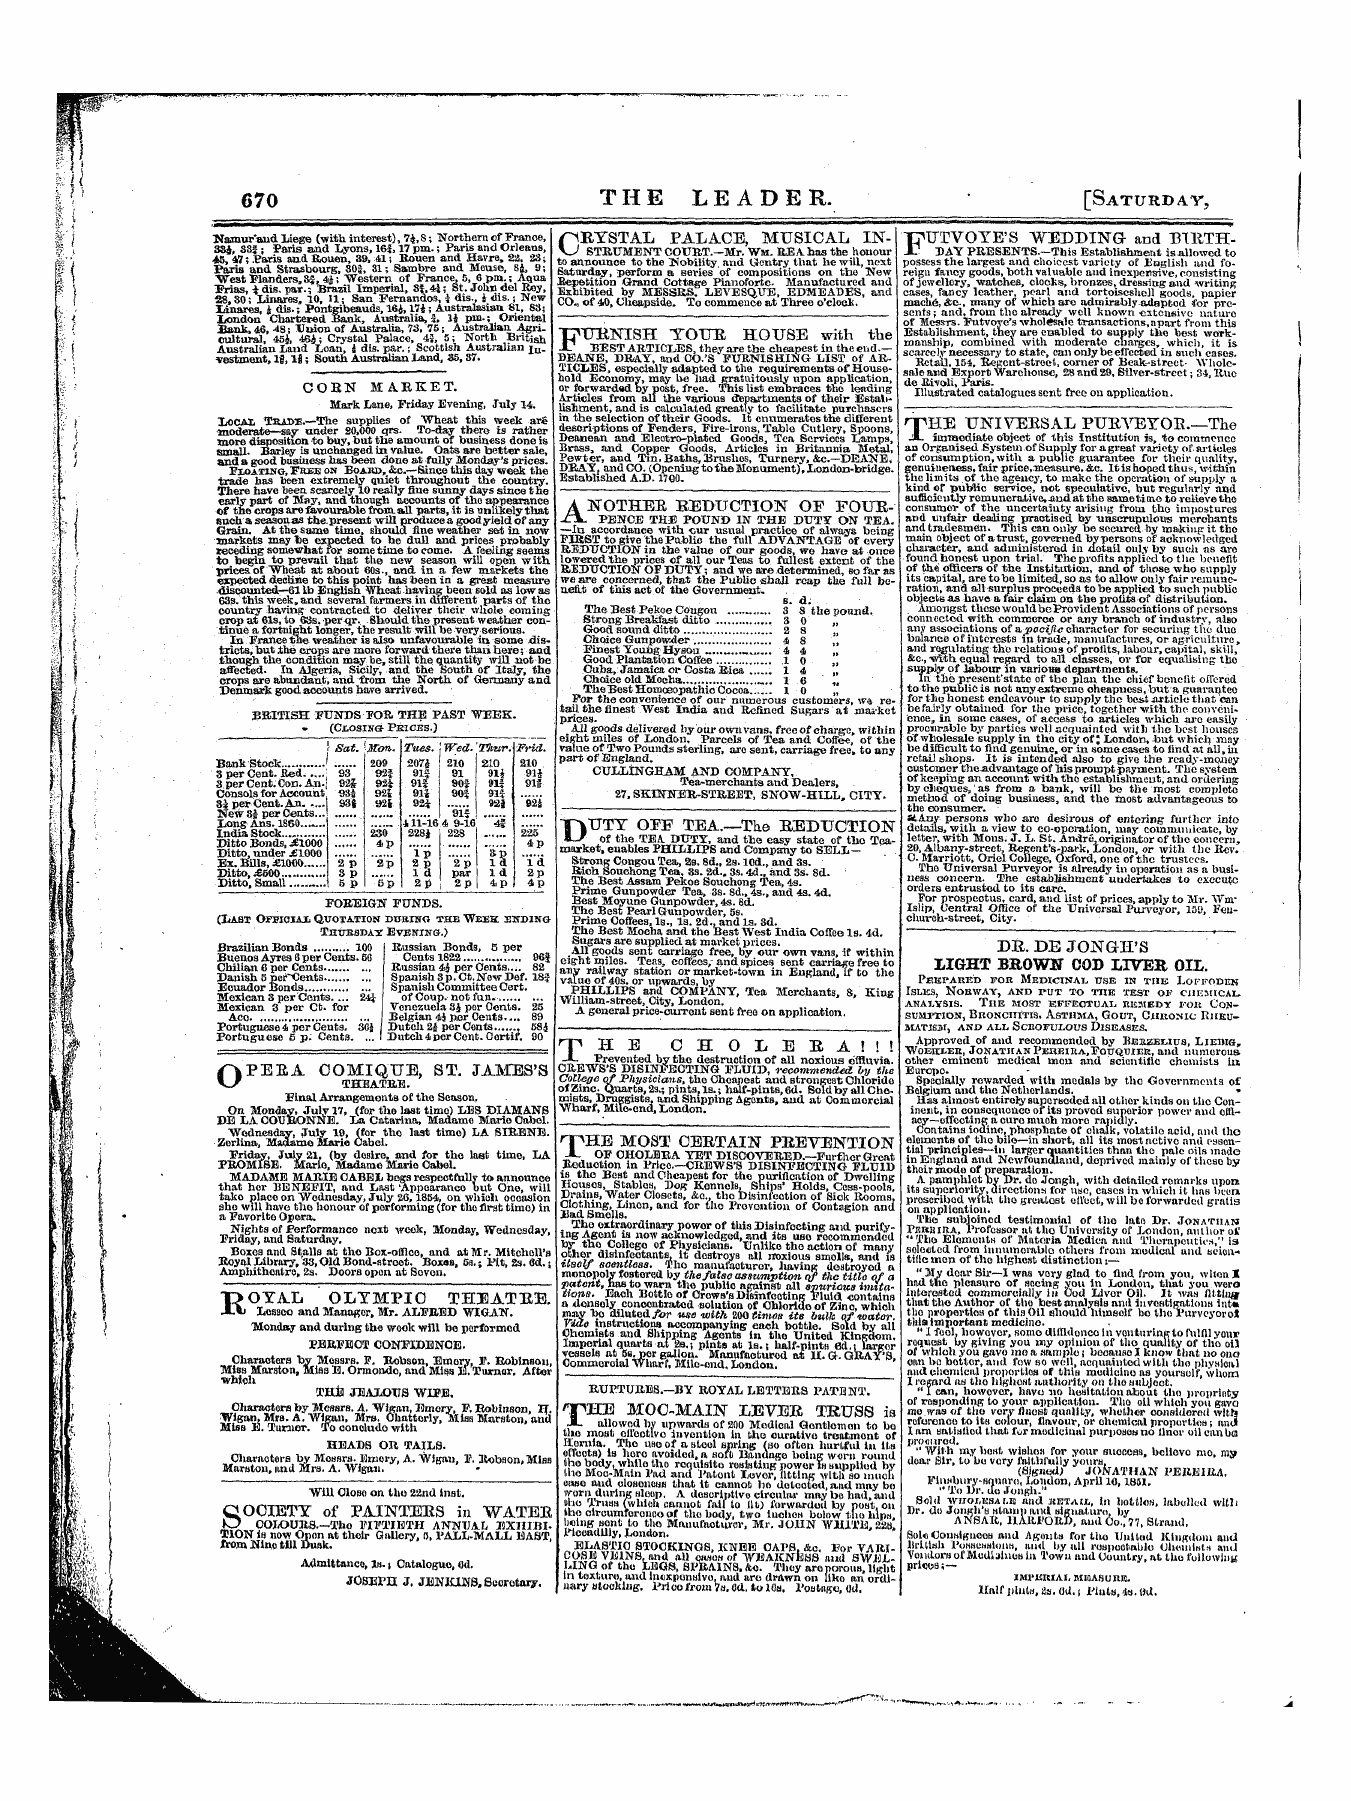 Leader (1850-1860): jS F Y, 1st edition - Untitled Ad